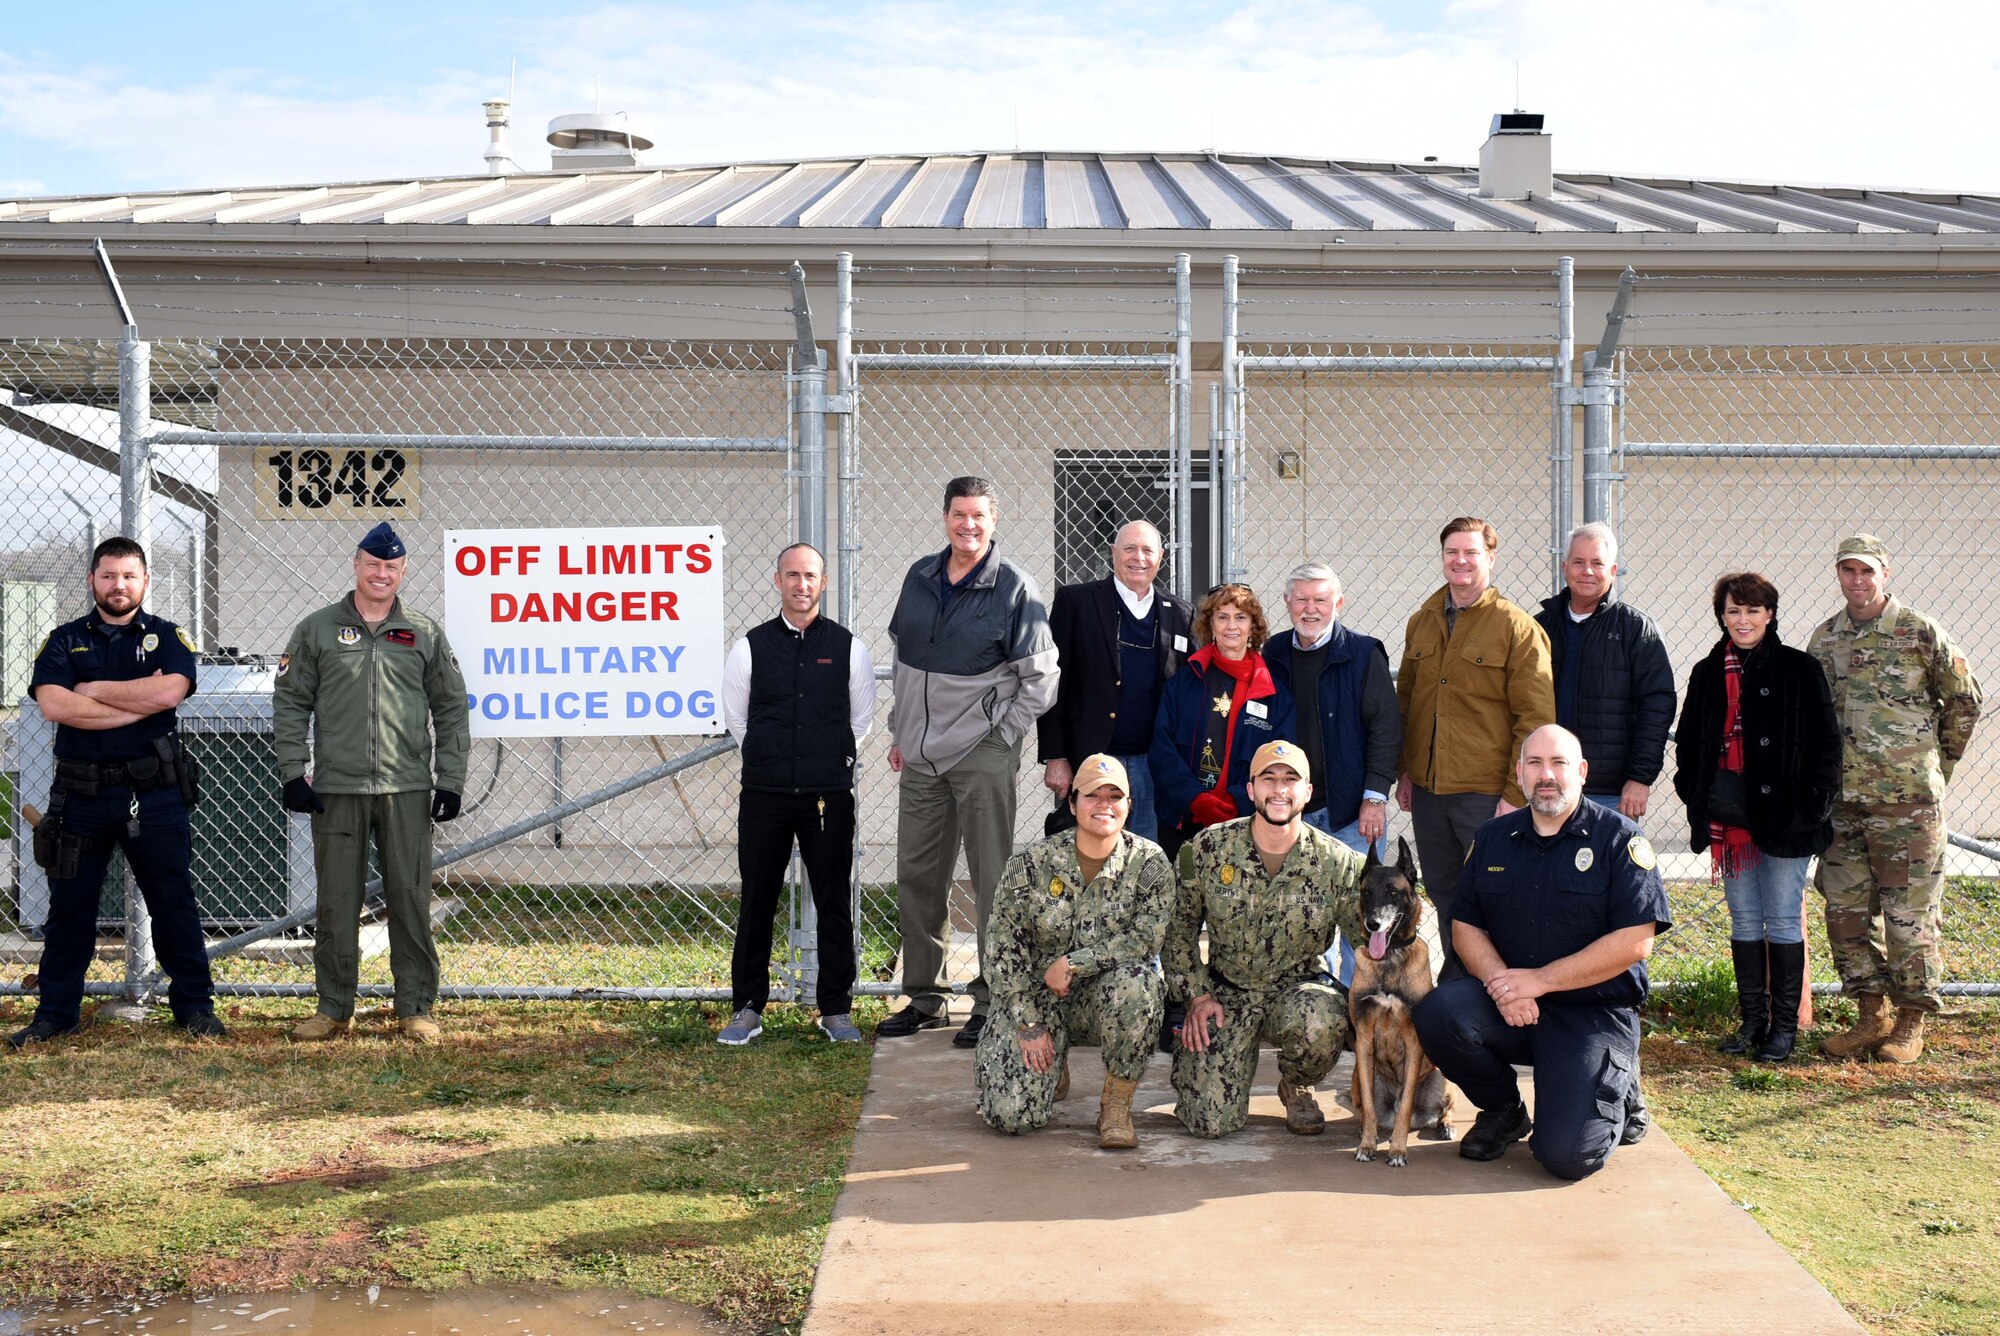 301st Fighter Wing Honorary Commanders and 301 FW leadership visit the military working dogs office during a tour at Naval Air Station Joint Reserve Base Fort Worth, Dec. 20, 2021. MWDs are service dogs capable of detecting explosives, narcotics and locating missing individuals. (U.S. Air Force photo by Staff Sgt. Randall Moose)